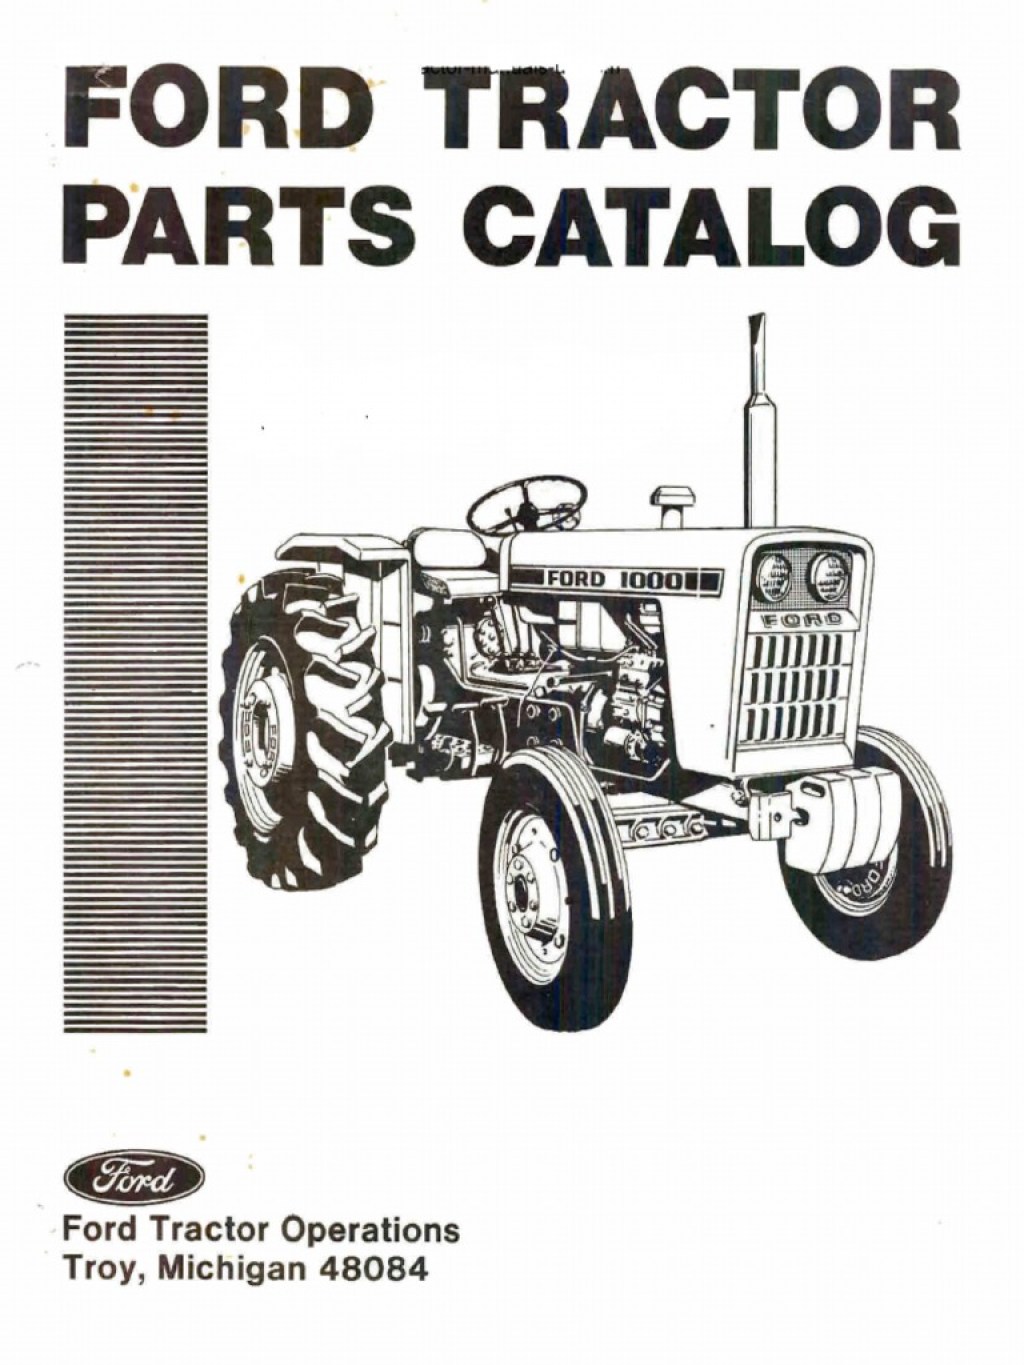 Picture of: Manual de Partes Tractor Ford   PDF  Nut (Hardware)  Screw